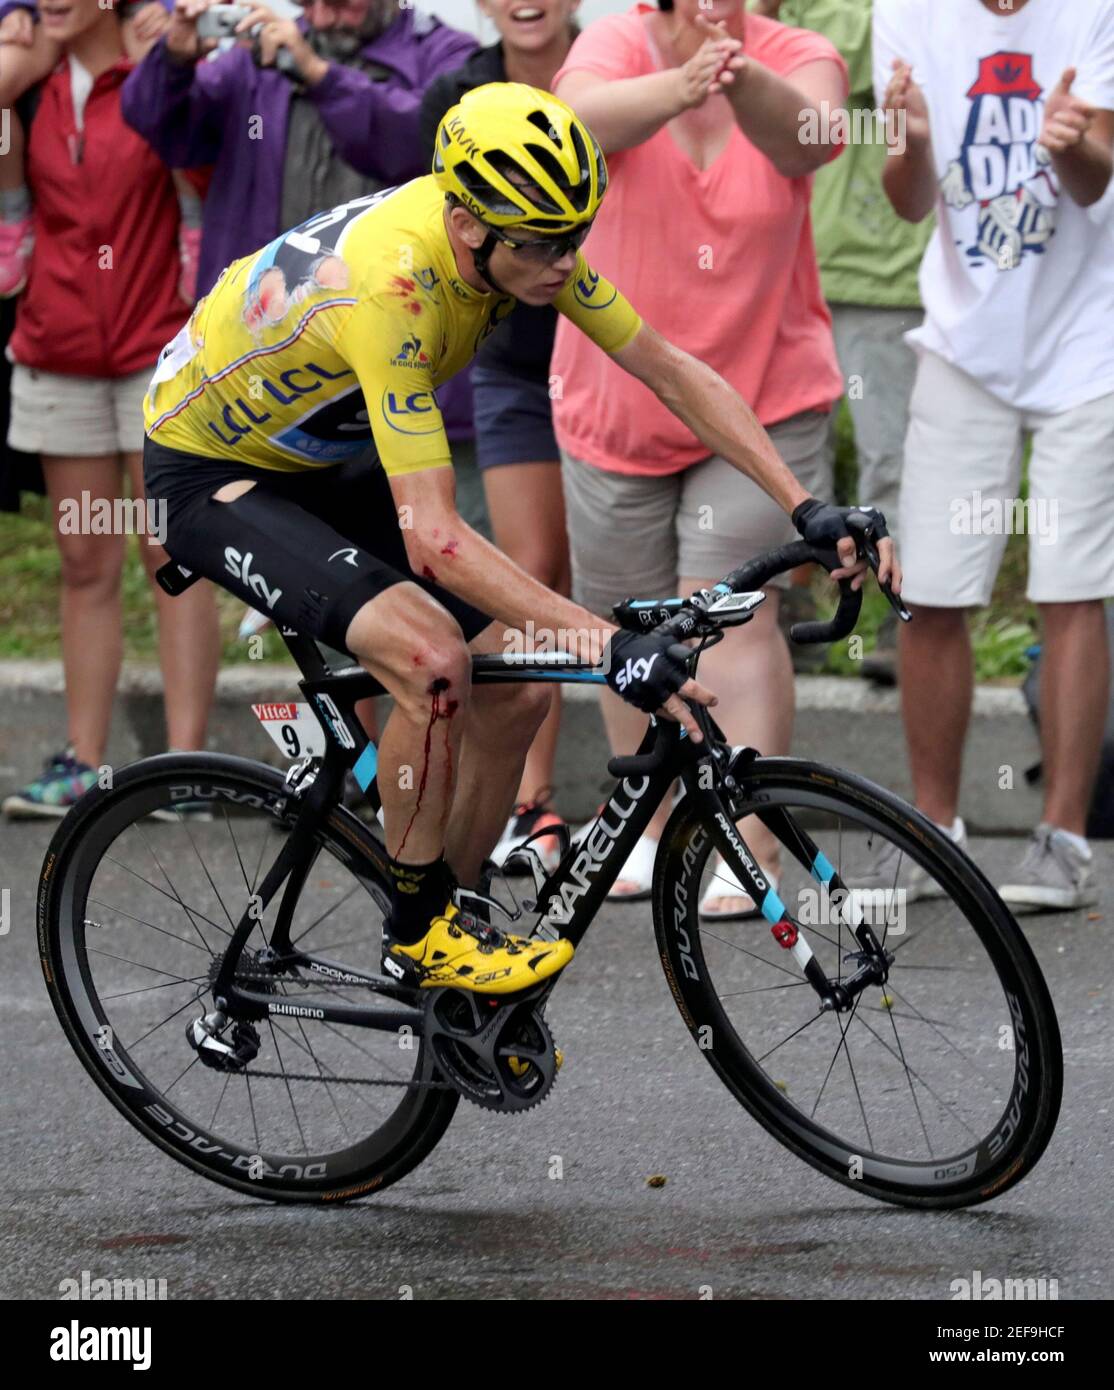 Cycling - Tour de France cycling race - The 146 km (90 miles) Stage 19 from Albertville to Saint-Gervais Mont Blanc, France - 22/07/2016  - Yellow jersey leader Team Sky rider Chris Froome of Britain rides after a fall during the stage.   REUTERS/Kenzo Tribouillard/Pool   Picture Supplied by Action Images Stock Photo